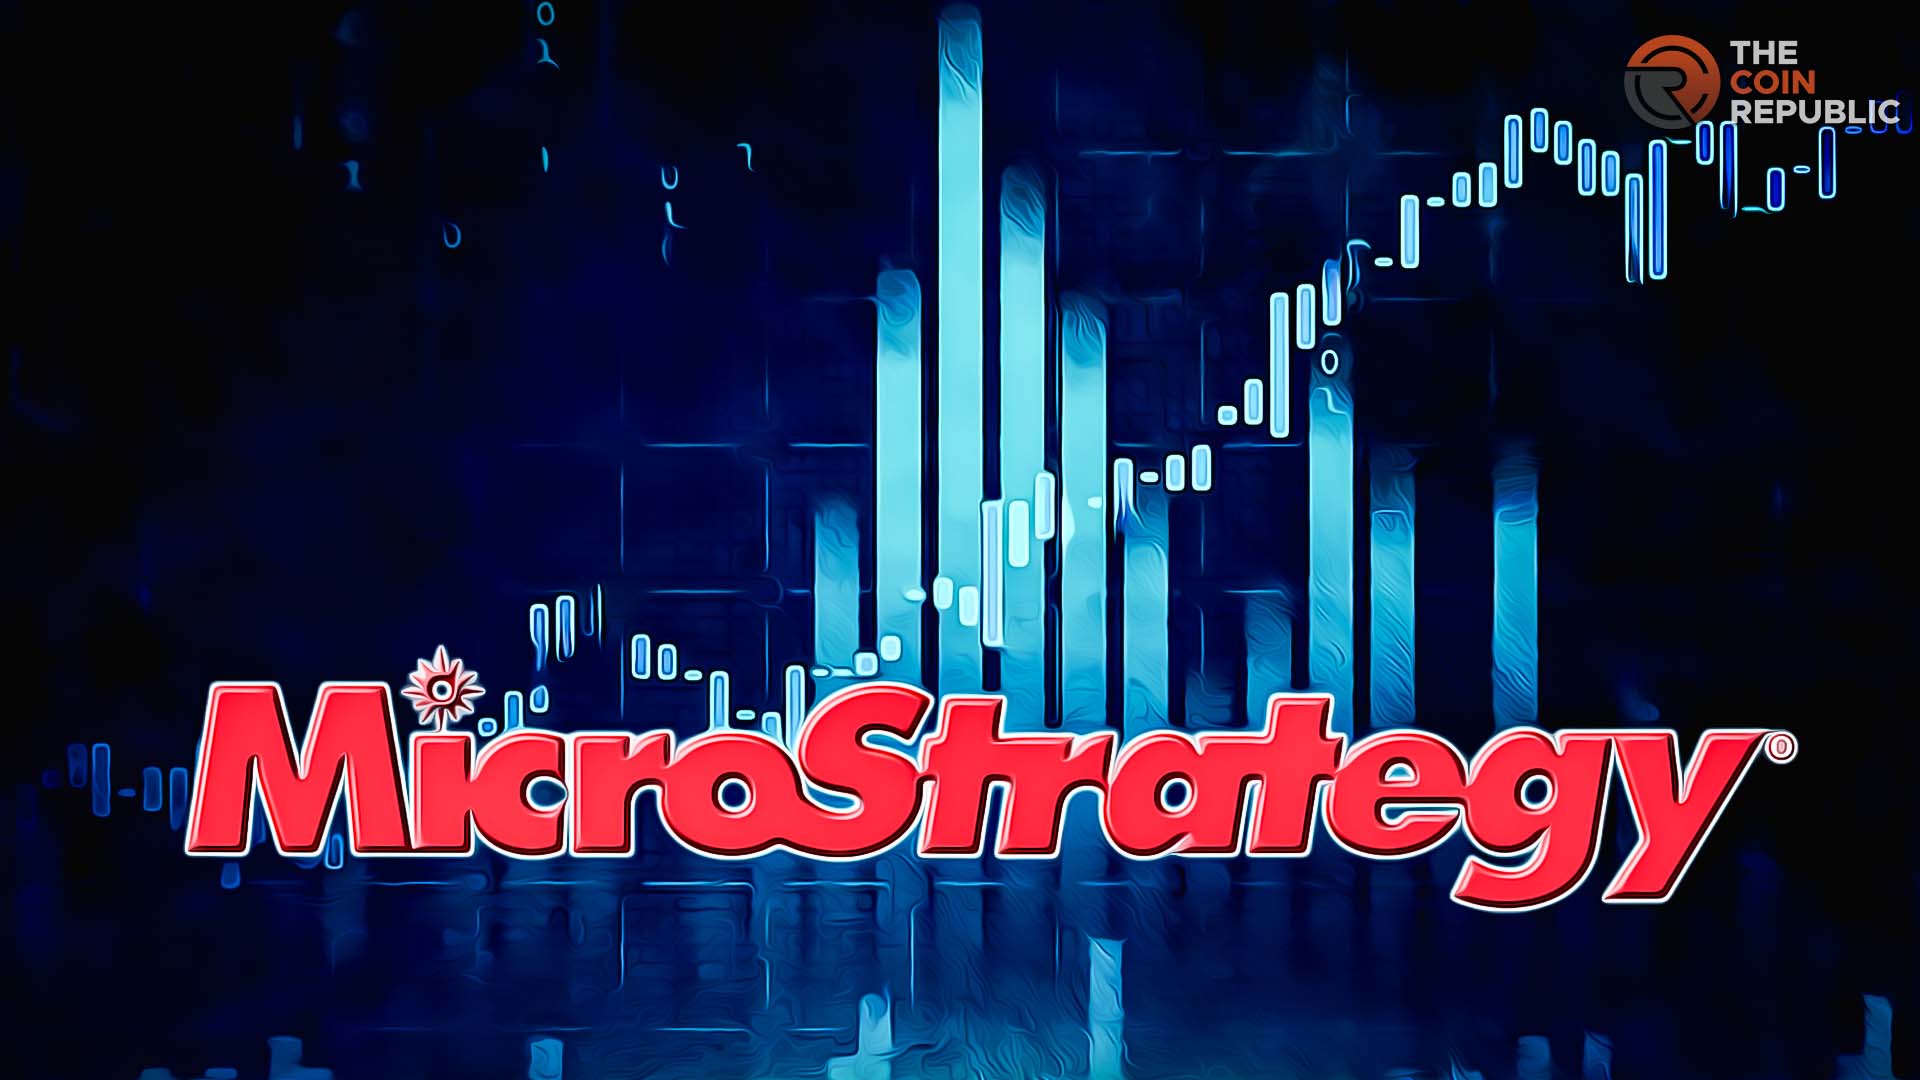 MSTR Stock Price: MicroStrategy Inc. to Play with Micheal Saylor